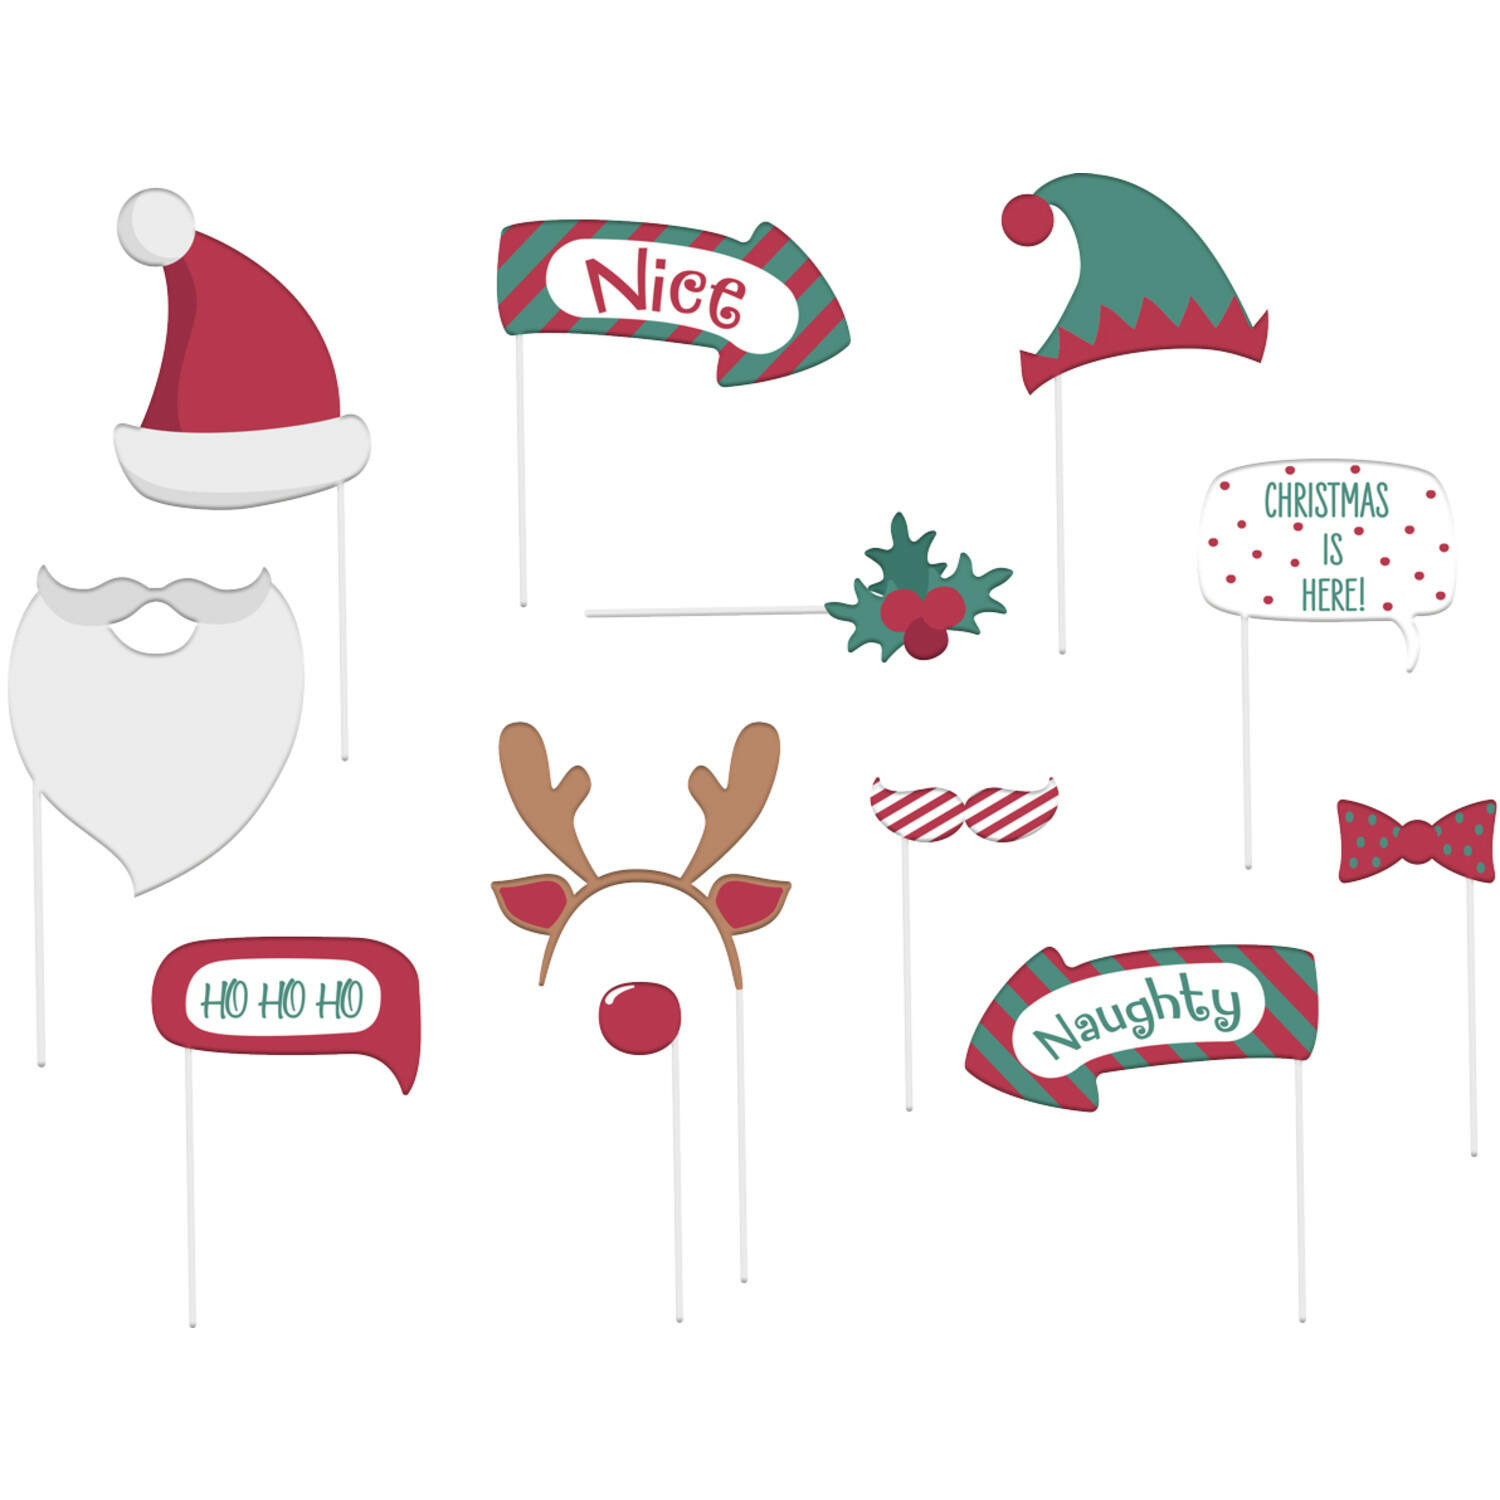 Kerst foto prop set - 12-delig - Christmas party - photo booth -